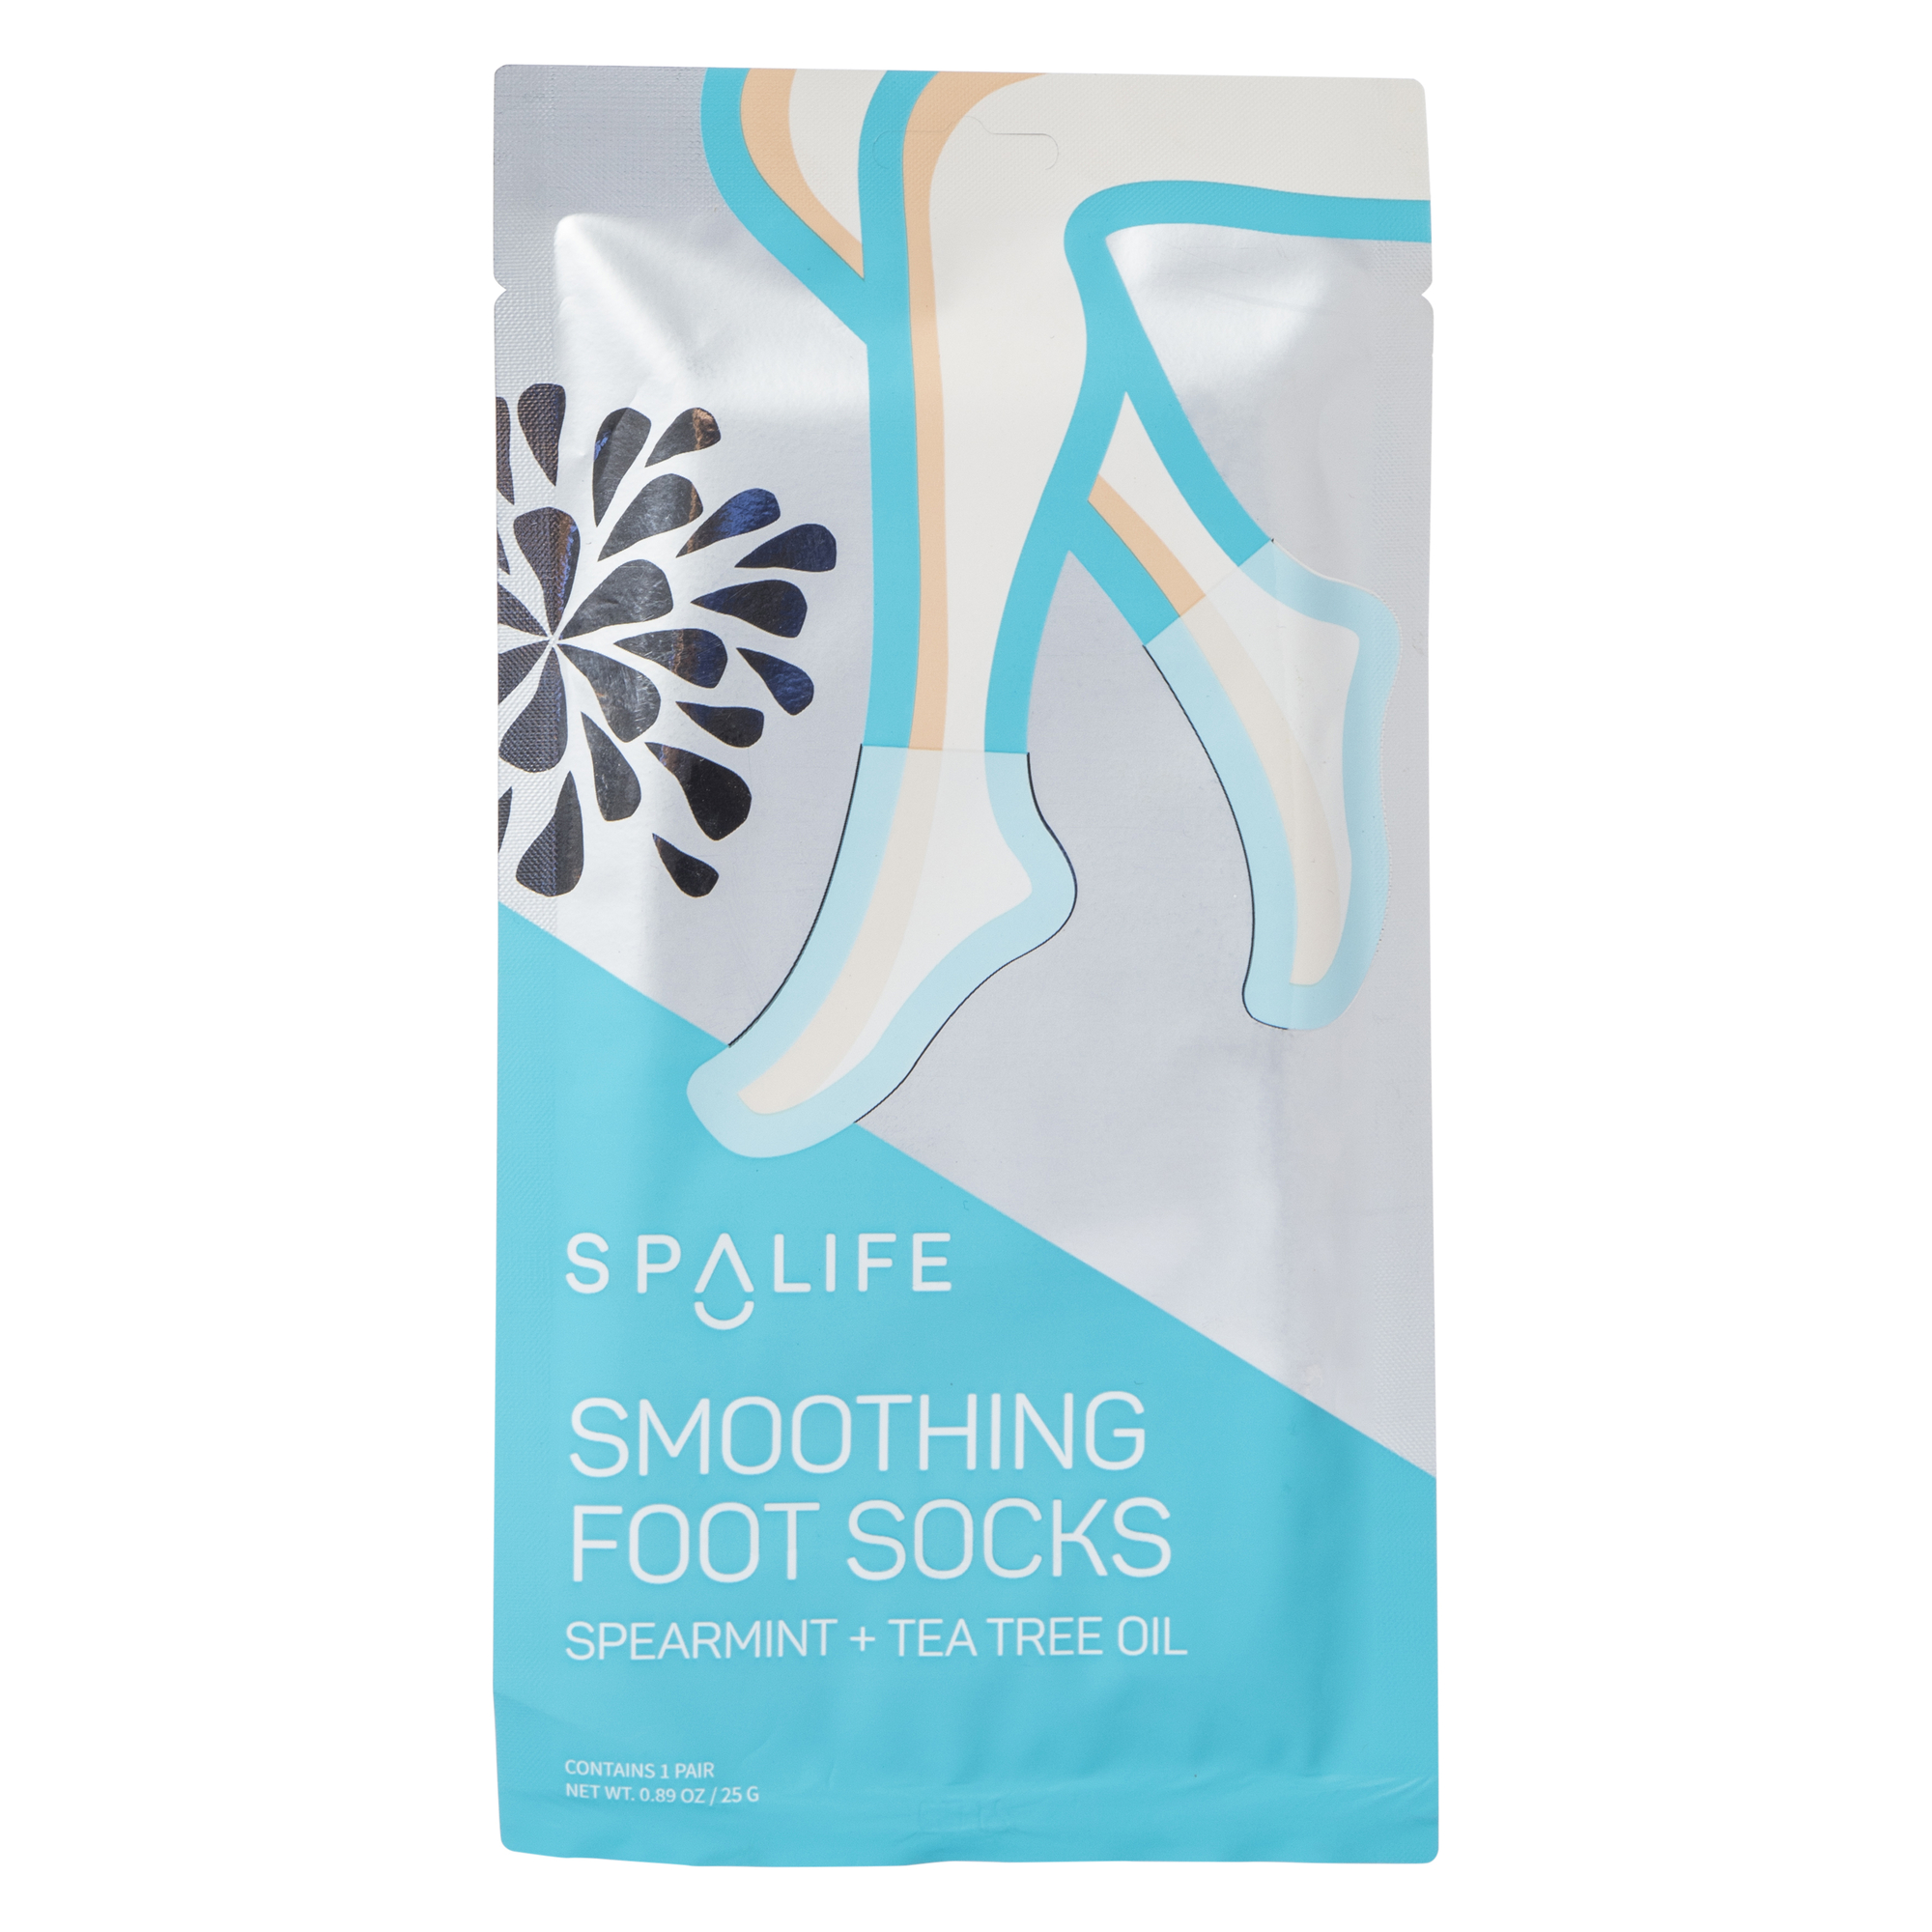 spa life™ smoothing foot socks with spearmint + tea tree oil